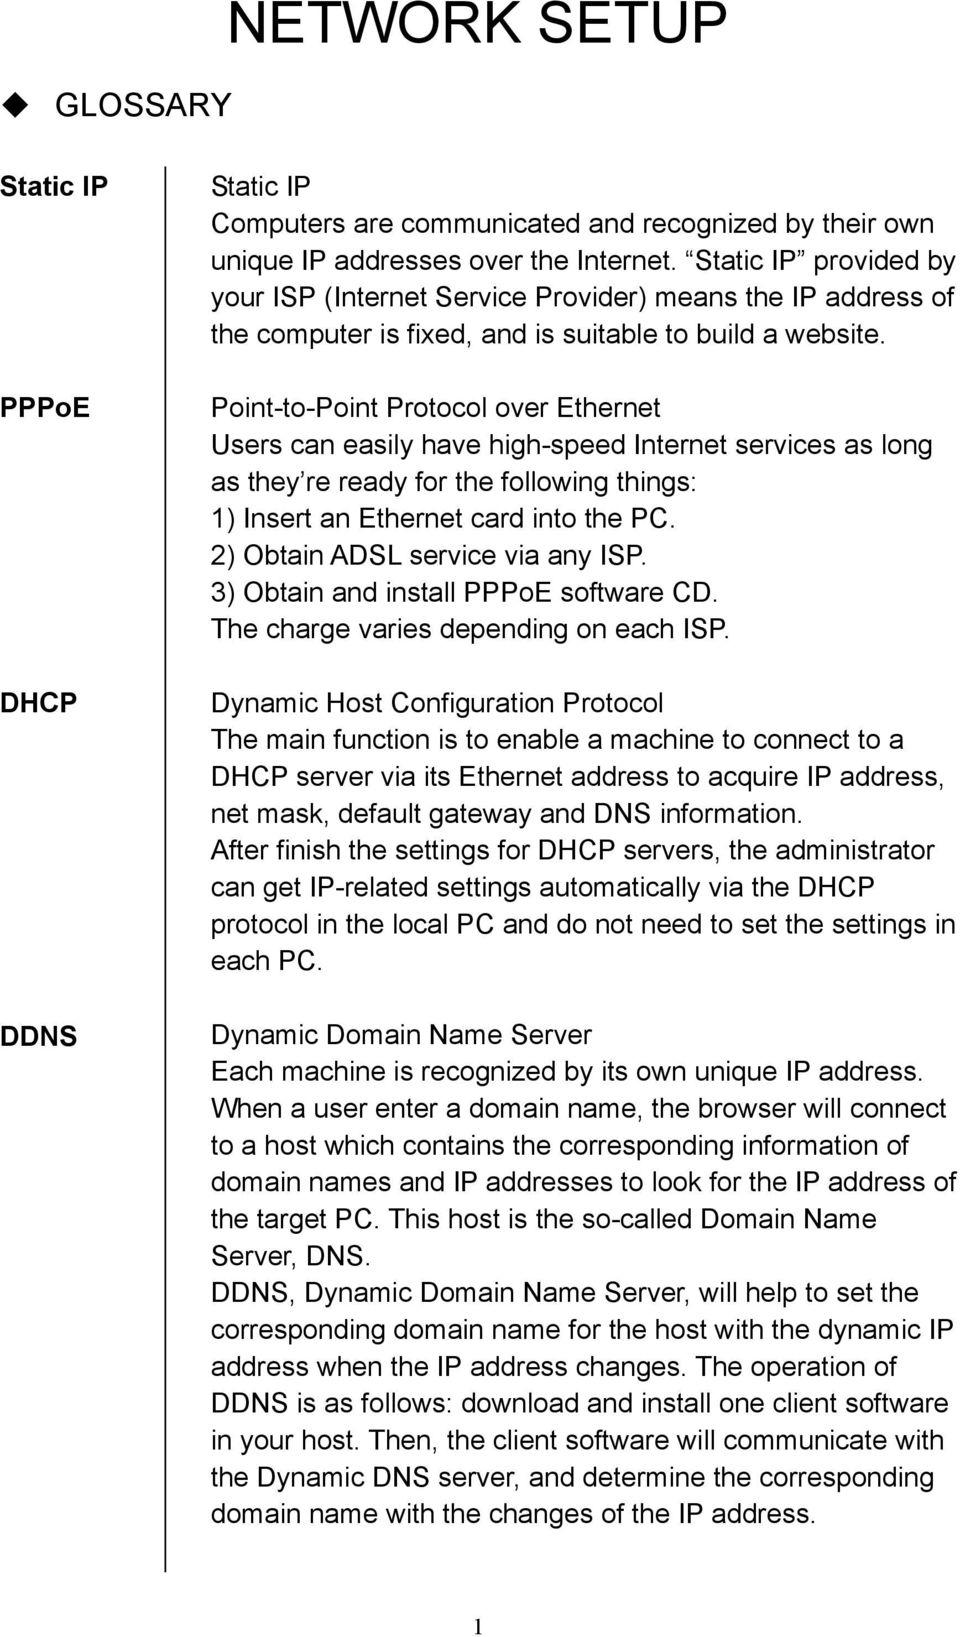 Point-to-Point Protocol over Ethernet Users can easily have high-speed Internet services as long as they re ready for the following things: 1) Insert an Ethernet card into the PC.